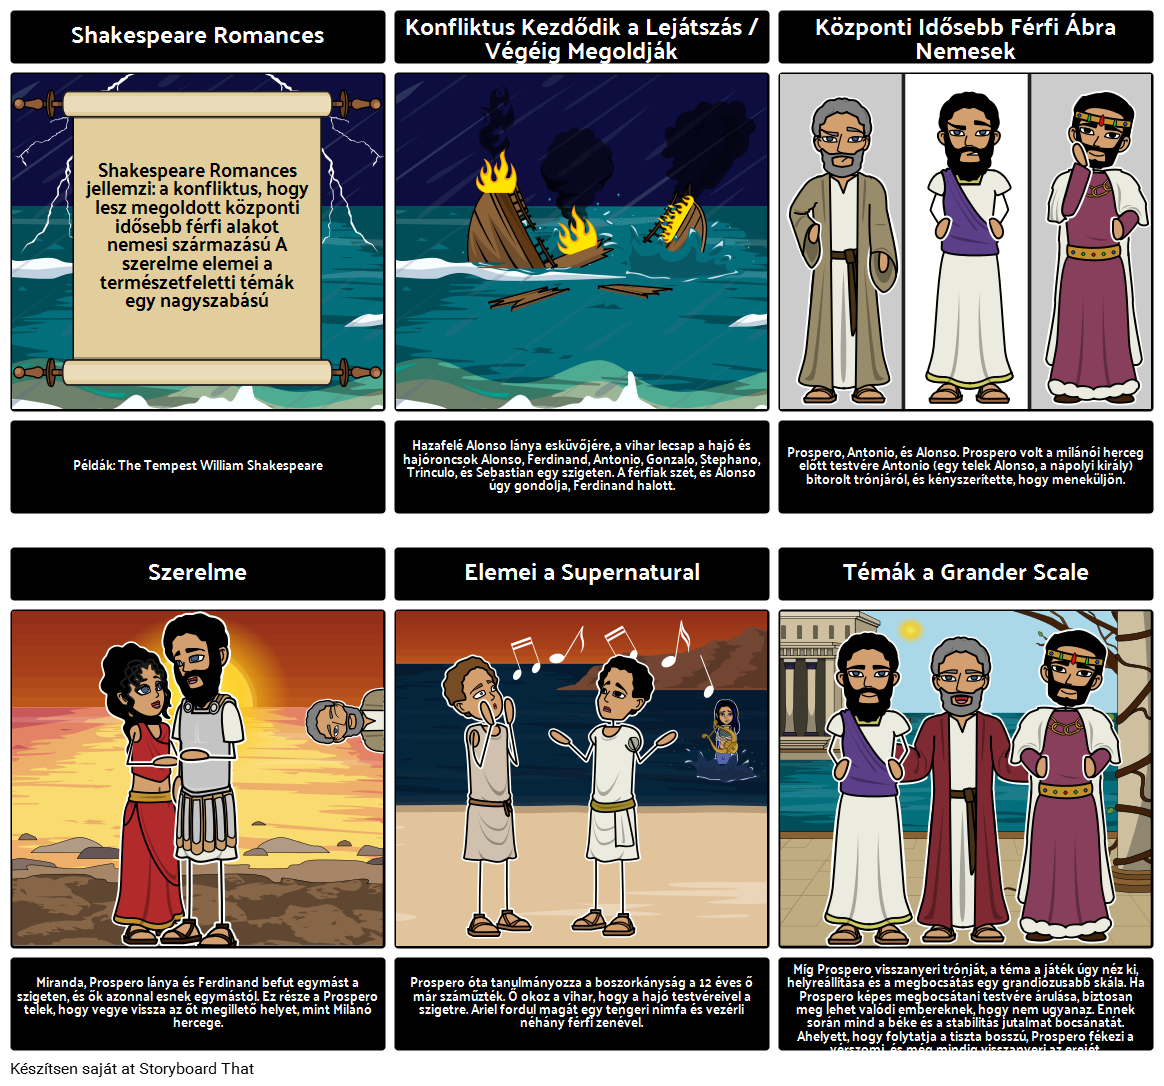 elements-of-shakespeare-romances-storyboard-by-hu-examples